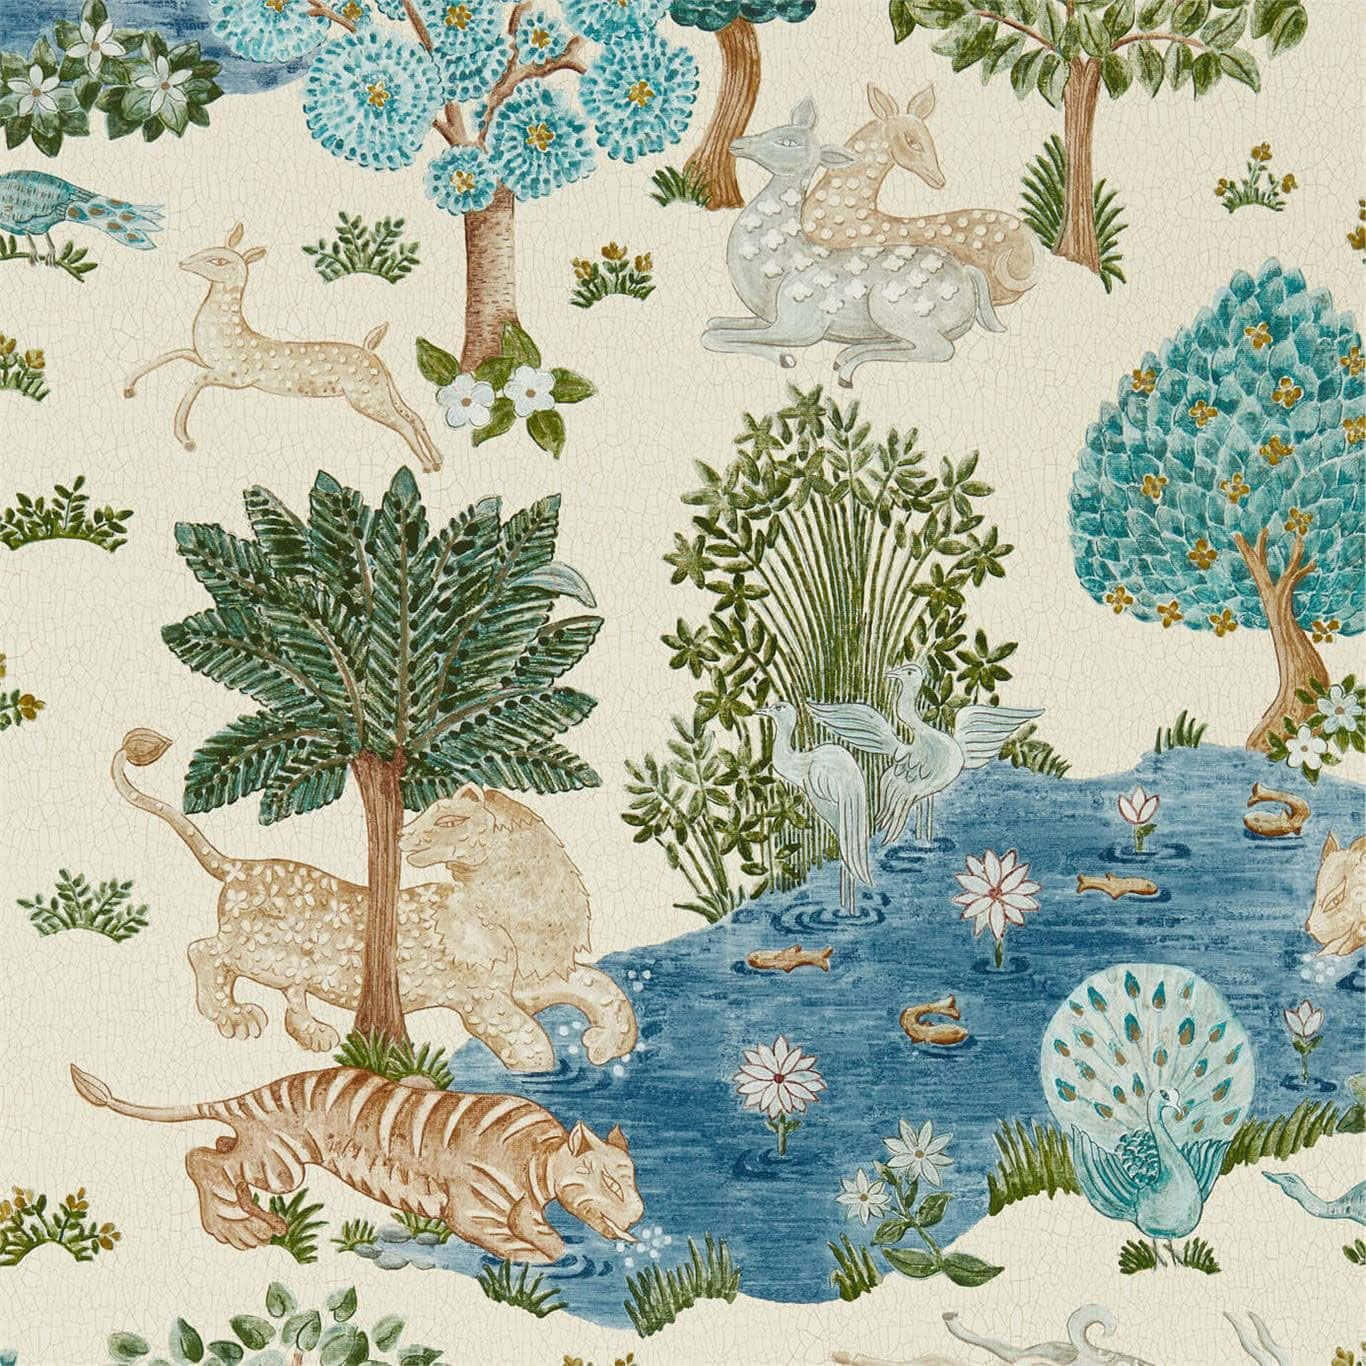 Enchanted Forest Fabric Pattern Wallpaper